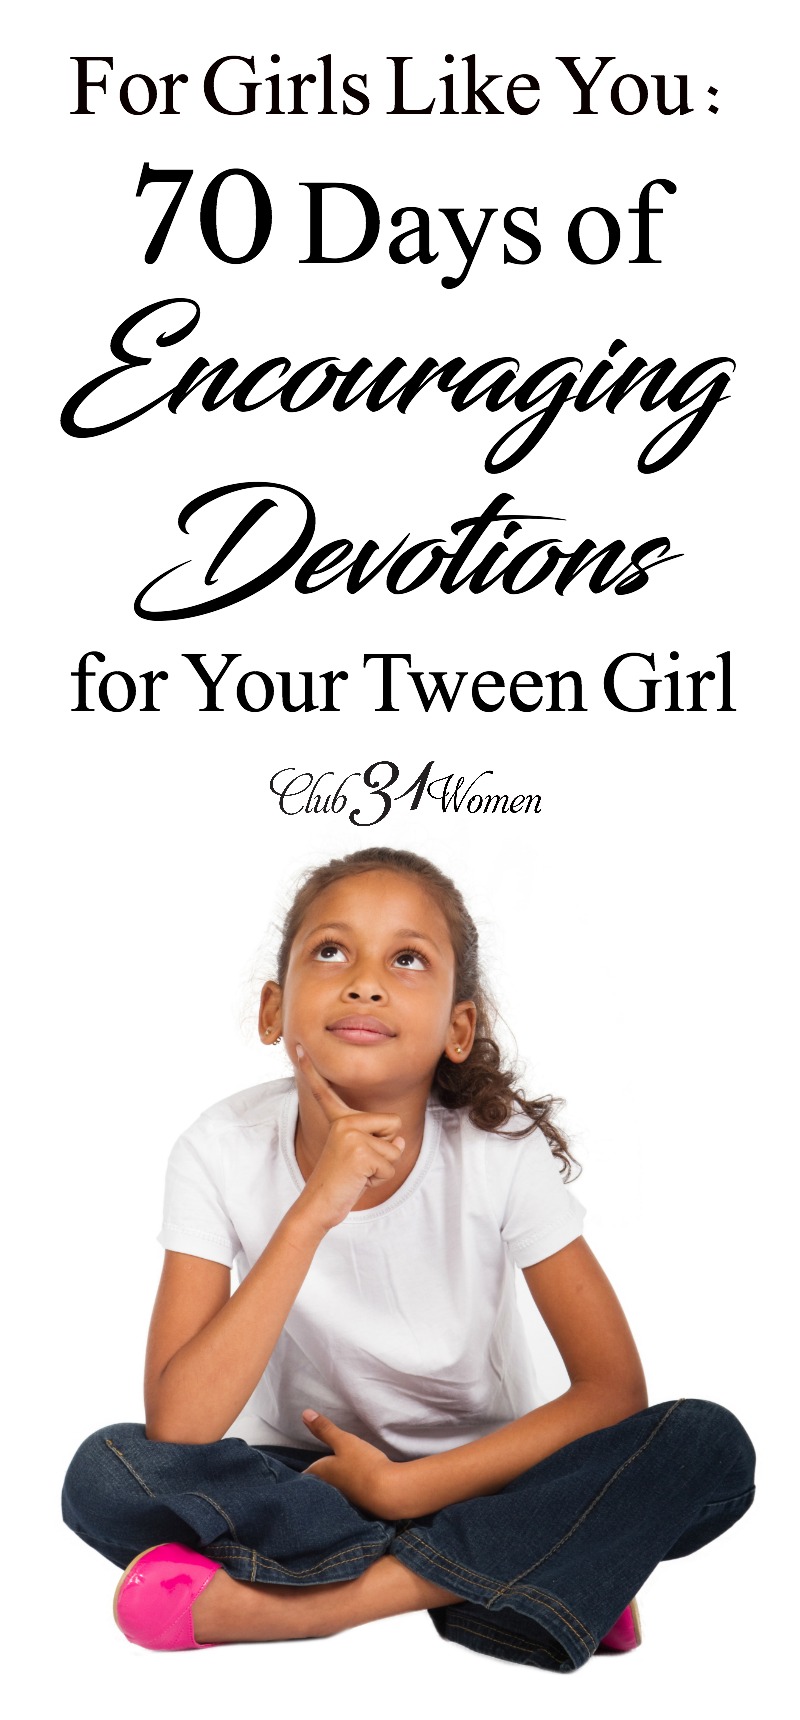 Are you raising a tween girl? And want an encouraging resource for her as she grows through these challenging younger years? Here's a recommended resource! via @Club31Women